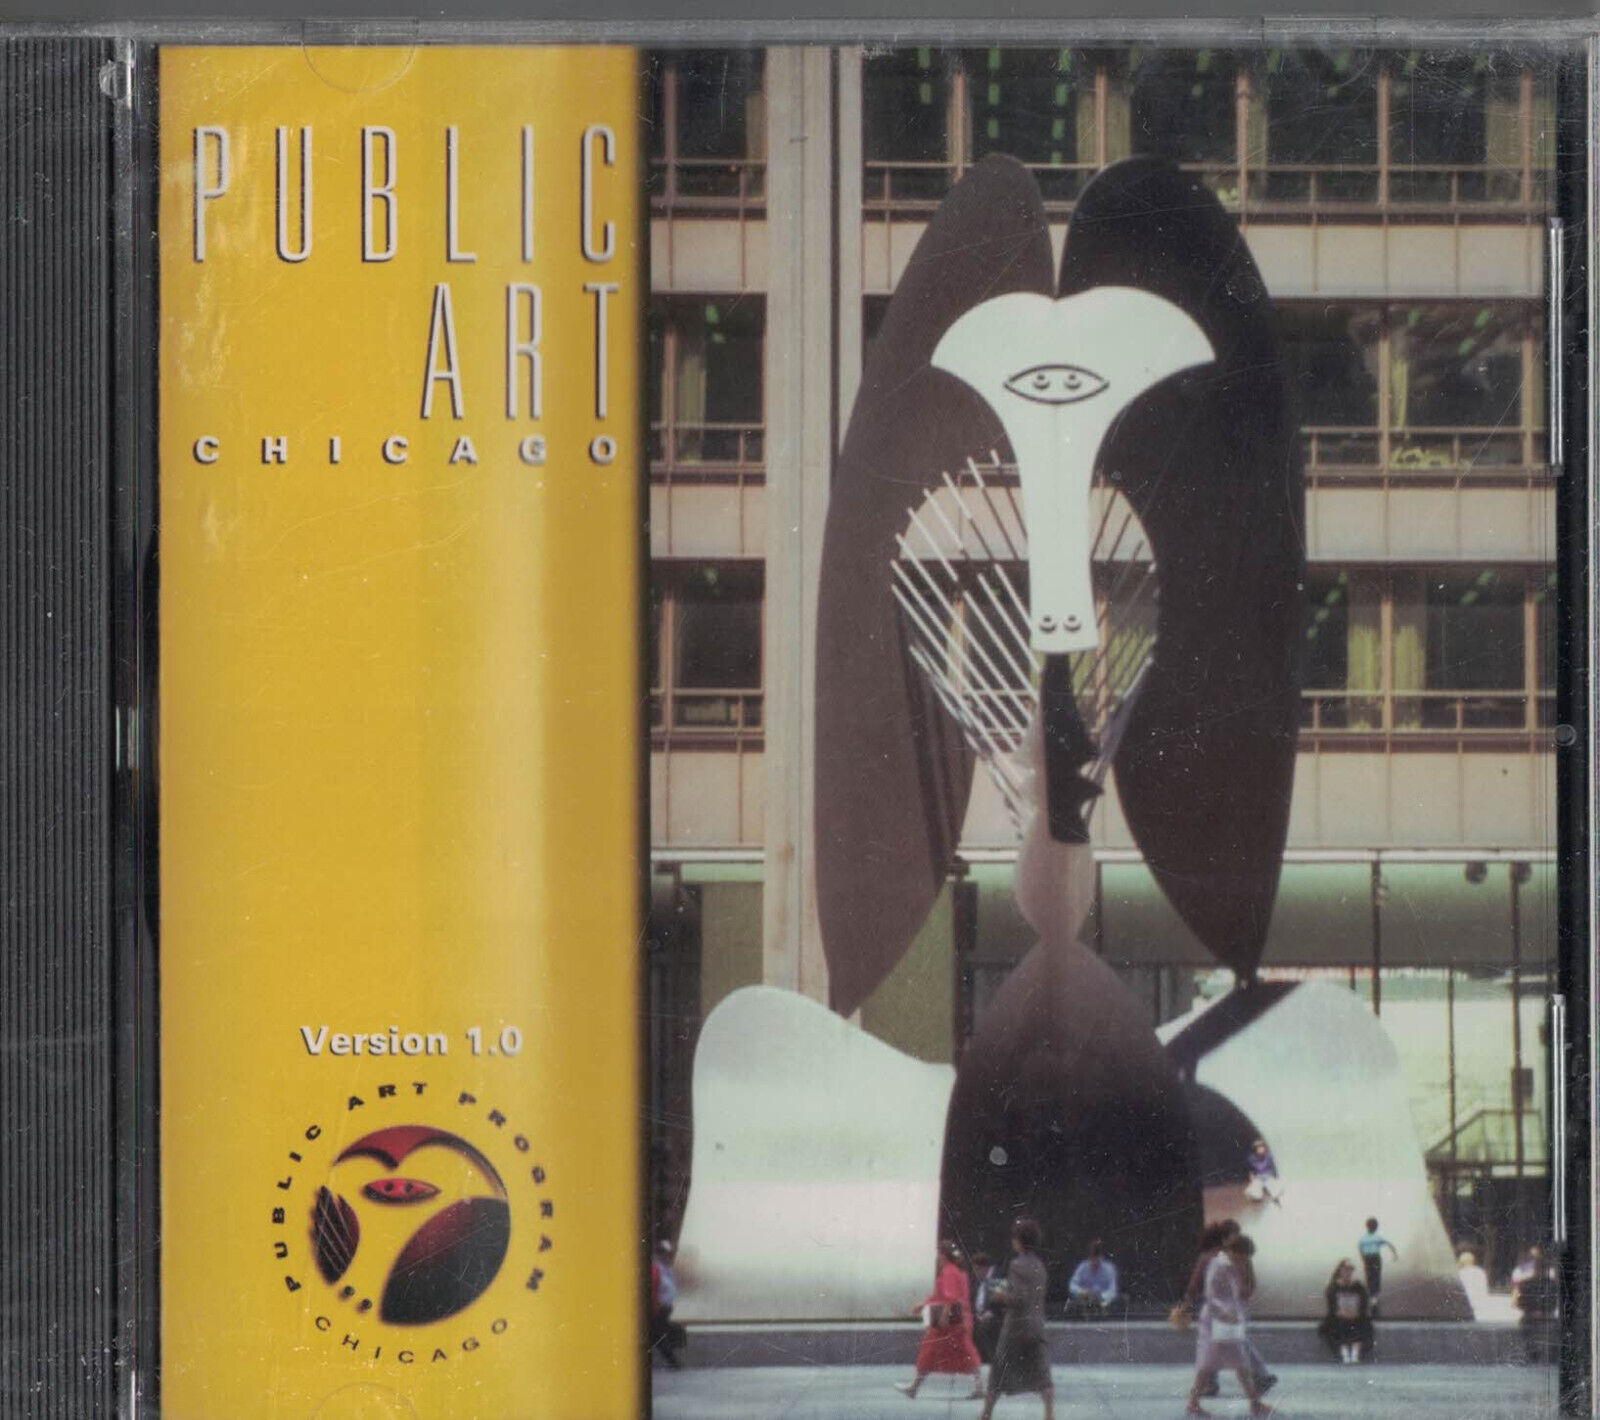 Public Art Chicago - Version 1.0  (CD-ROM) MAC/WIN95 - Brand New (with defect)